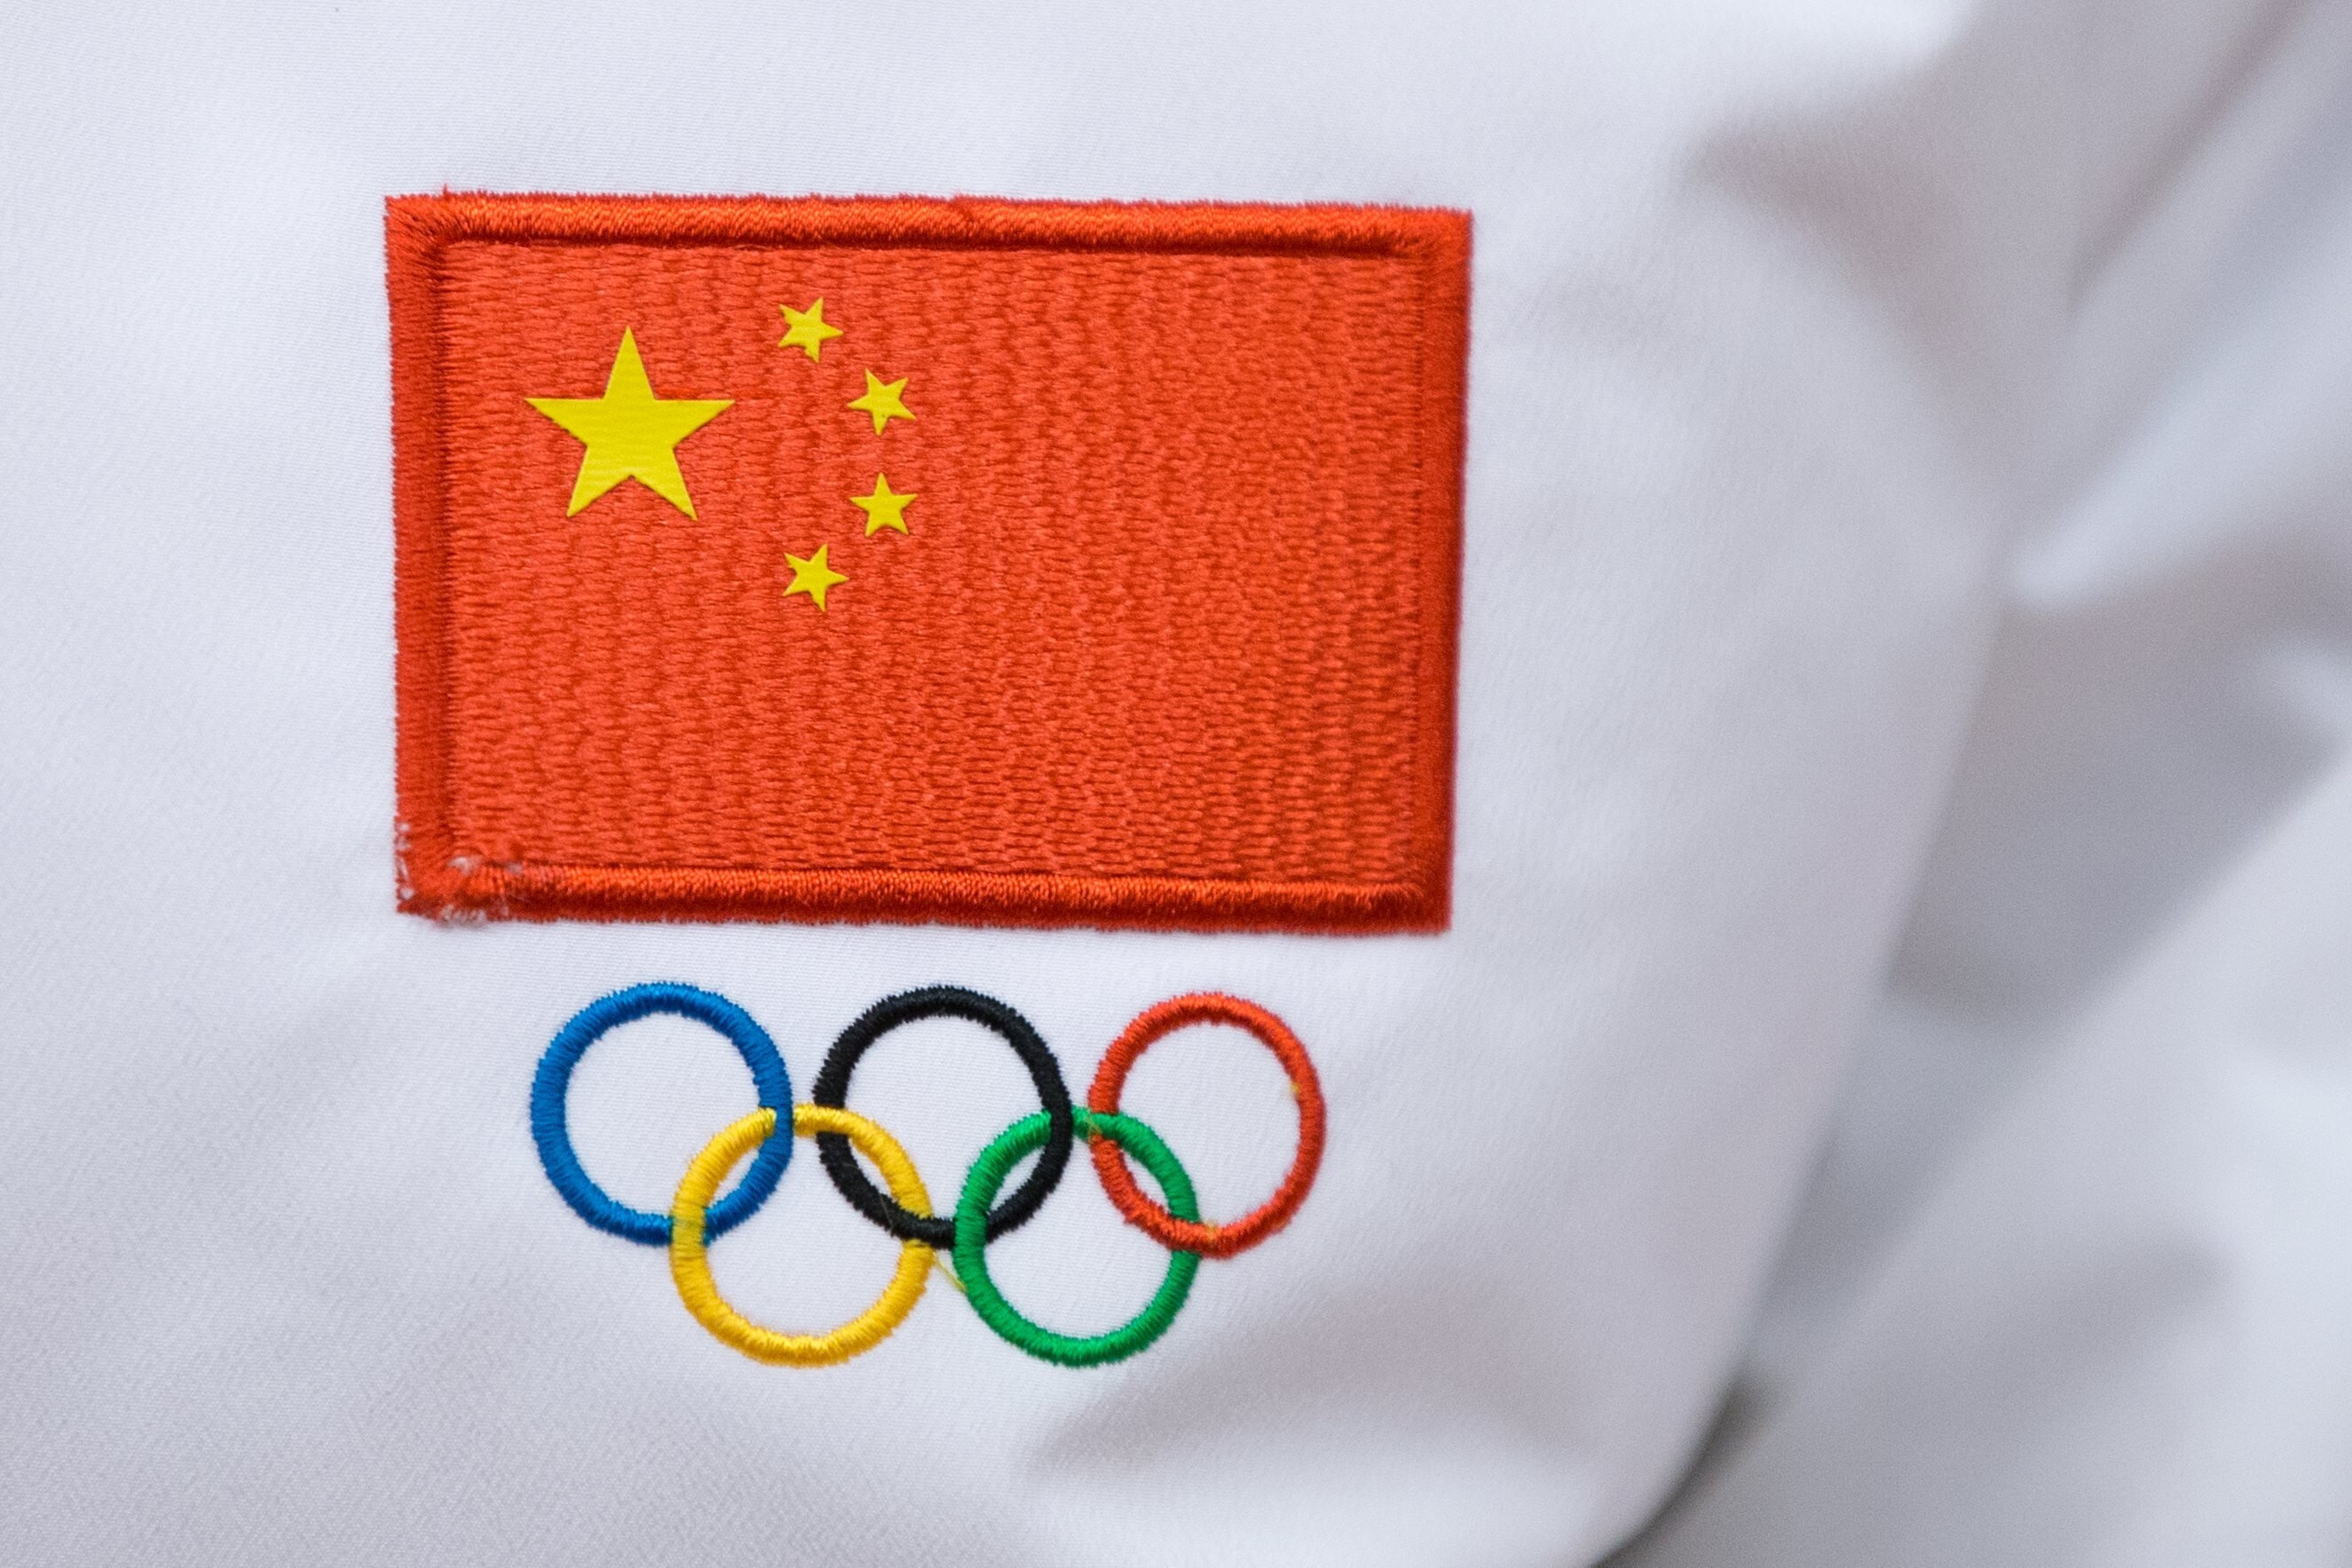 As the Beijing Winter Olympics countdown begins, calls to boycott the  'Genocide Games' grow